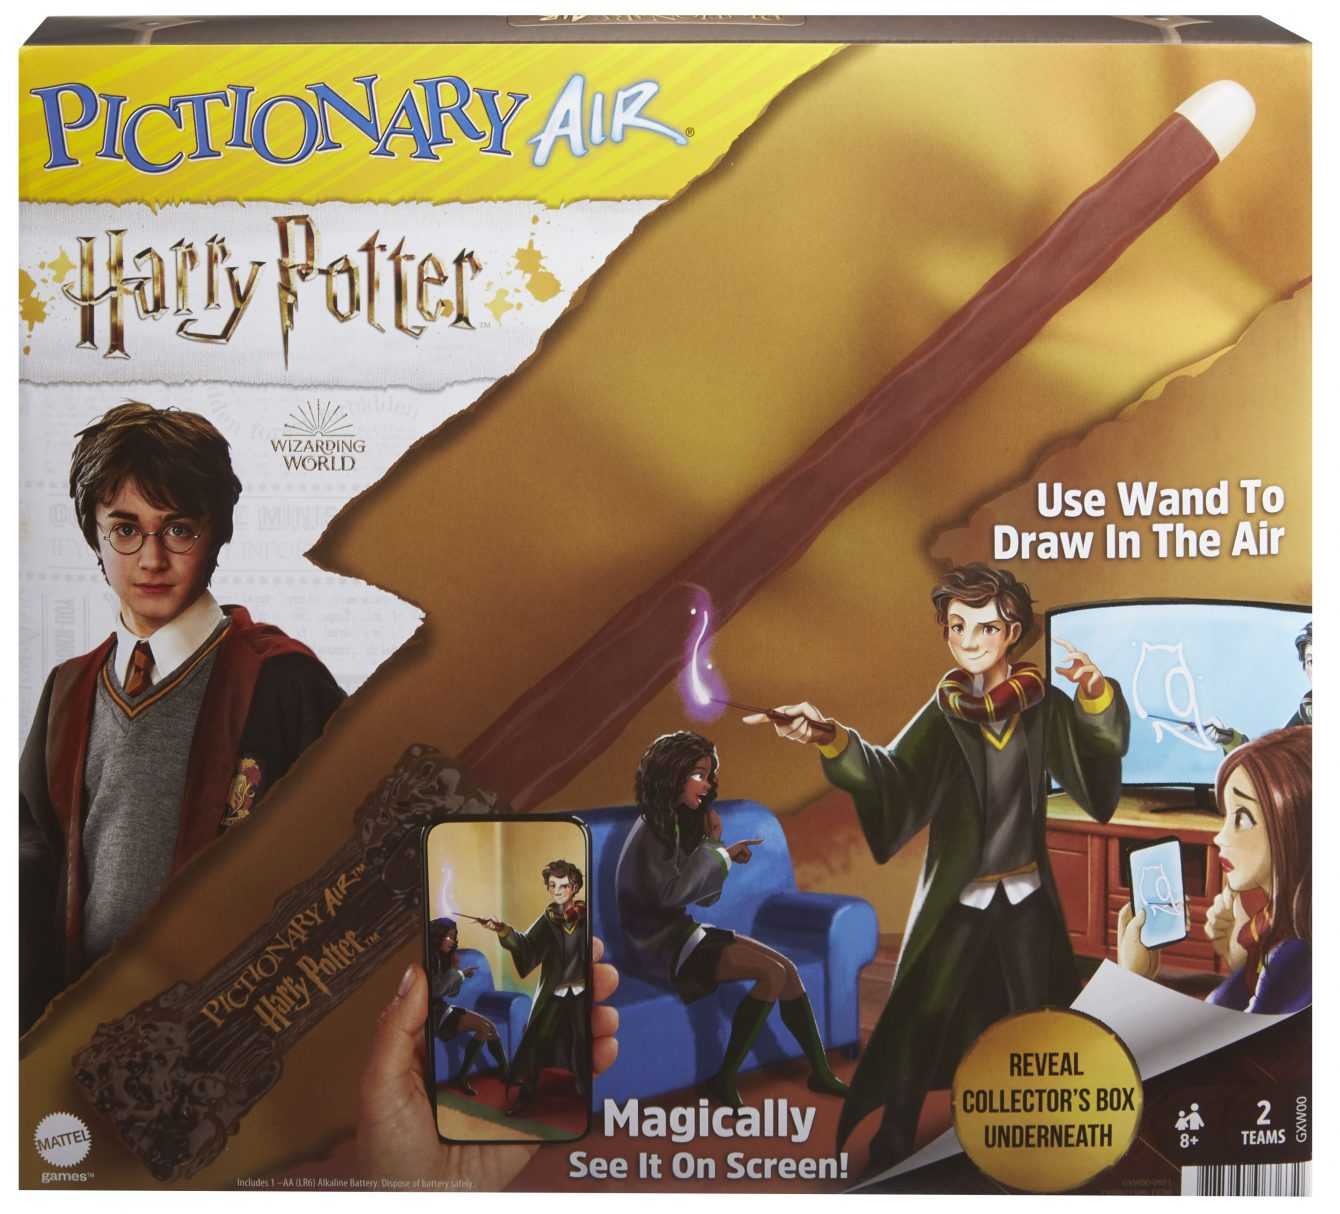 Mattel annuncia il nuovo Pictionary Air Harry Potter!